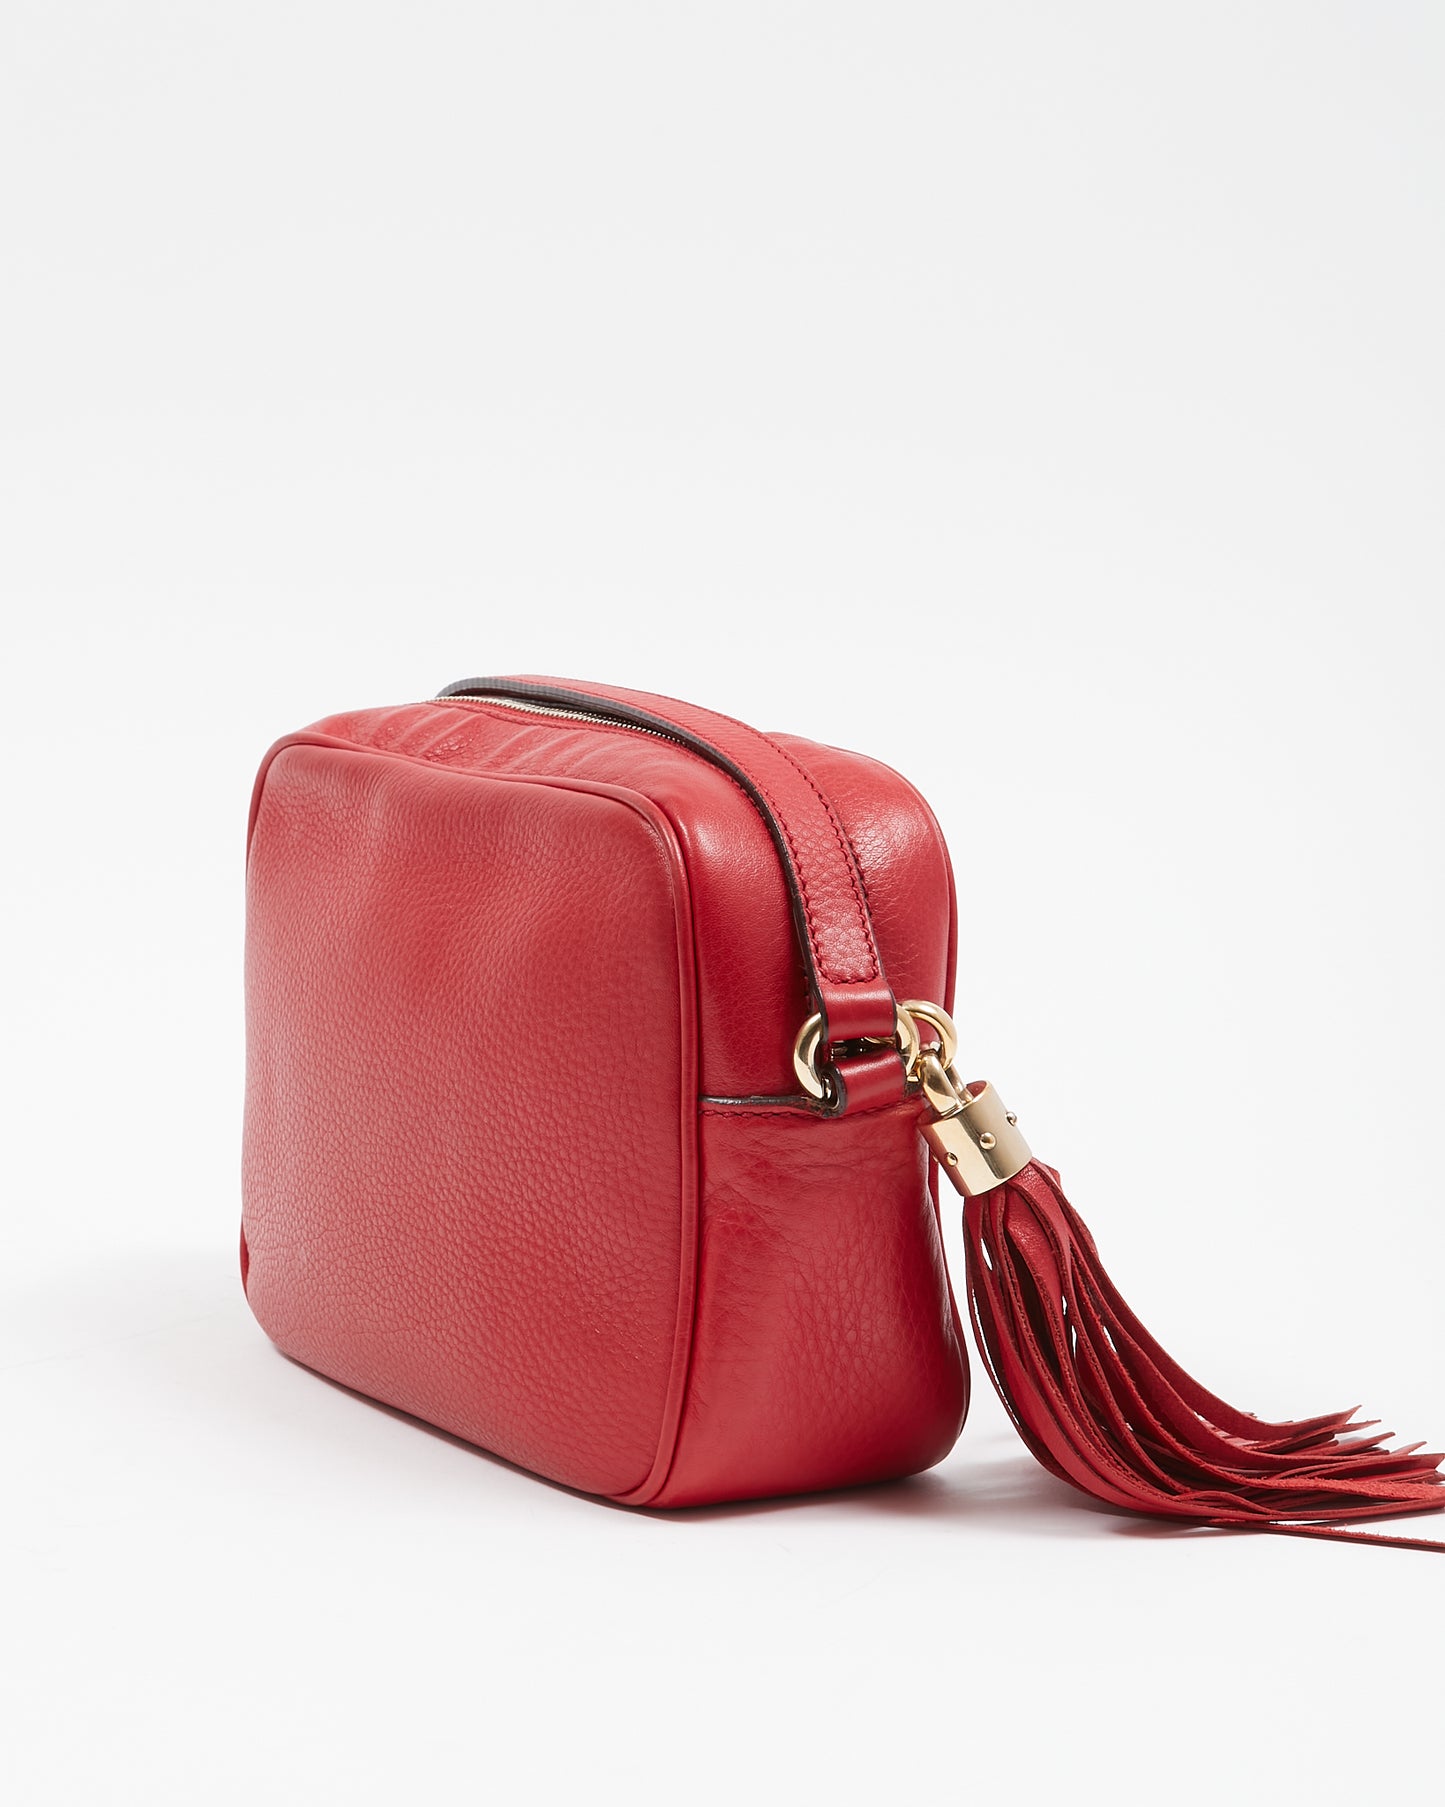 Gucci Red Pebbled Leather Soho Disco Camera bag